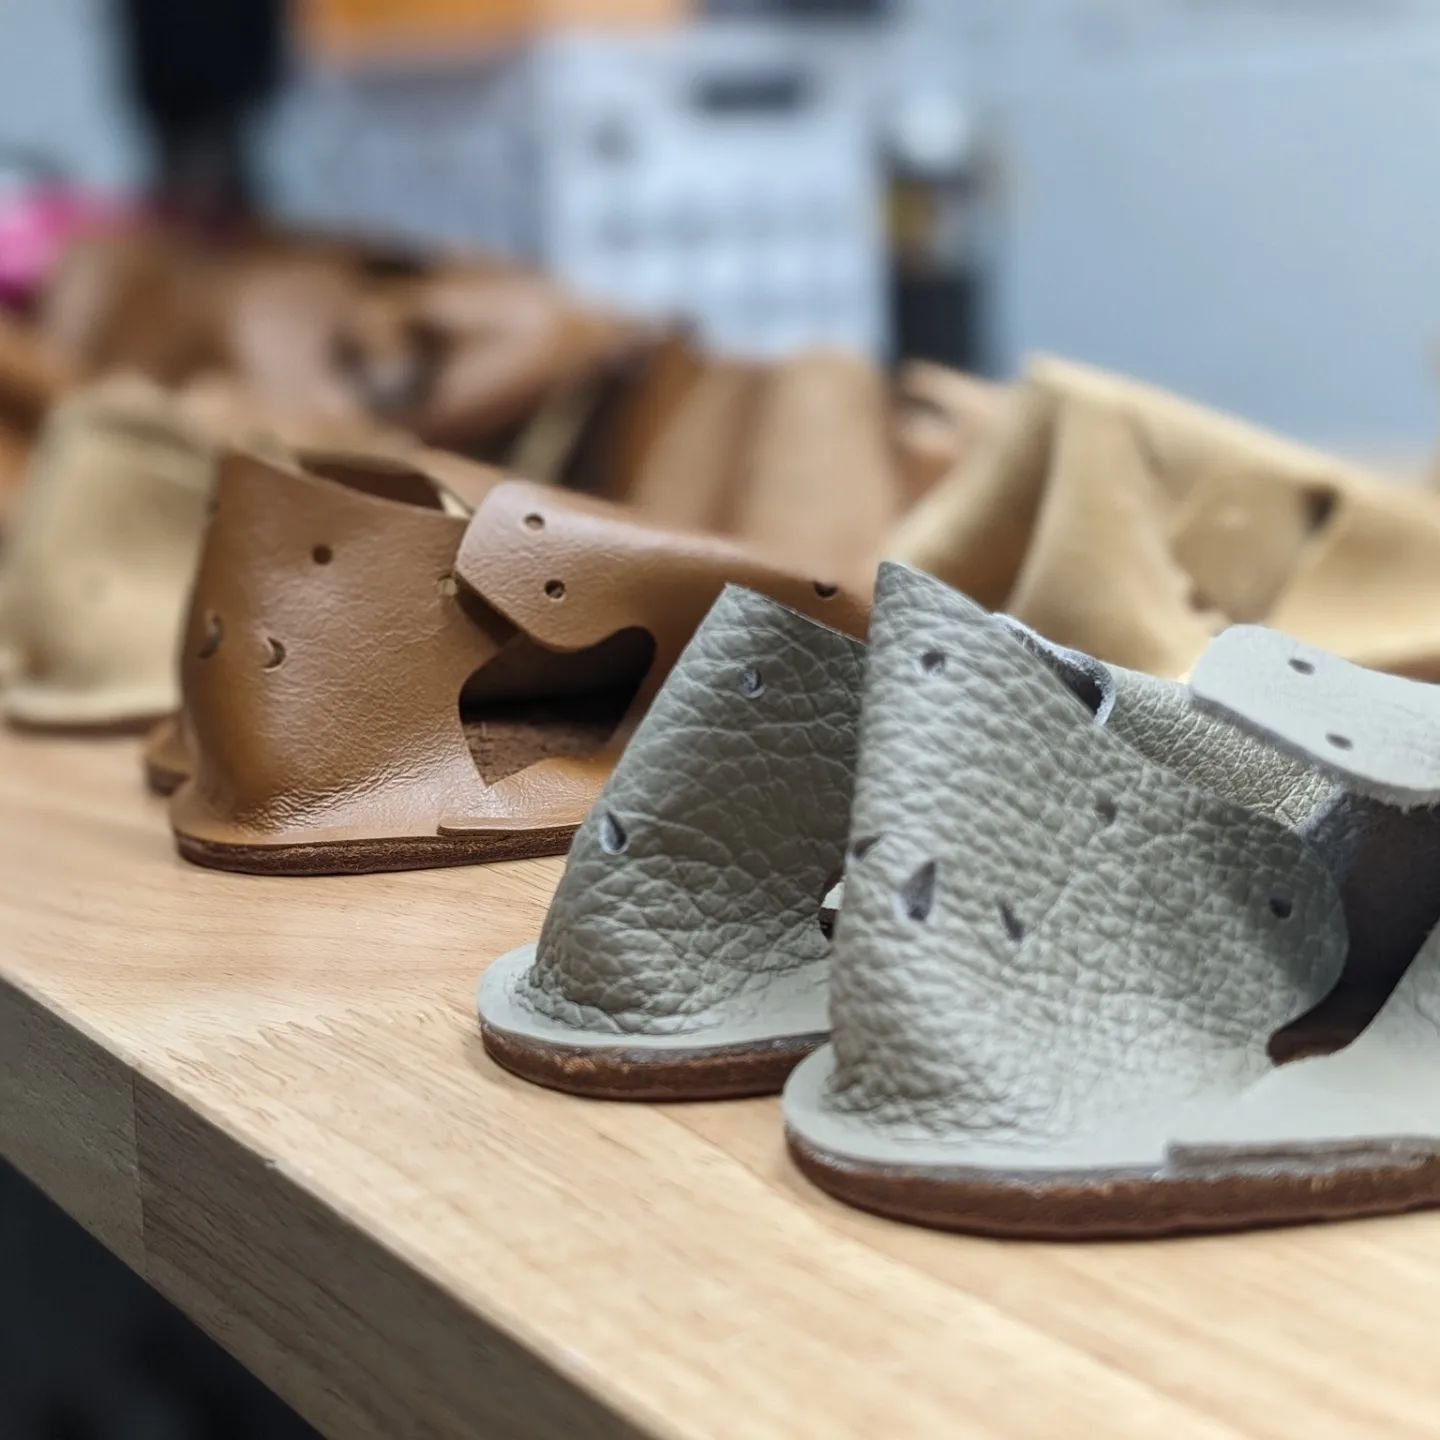 We've been V V busy making shoes in prep for Anya's Chicago Barefoot Shoe expo in a few weekends 🙃 Everyone will be able to try on shoes to see if they are a good fit and go home with them the same day! ALL of our shoes will be sold at reduced price